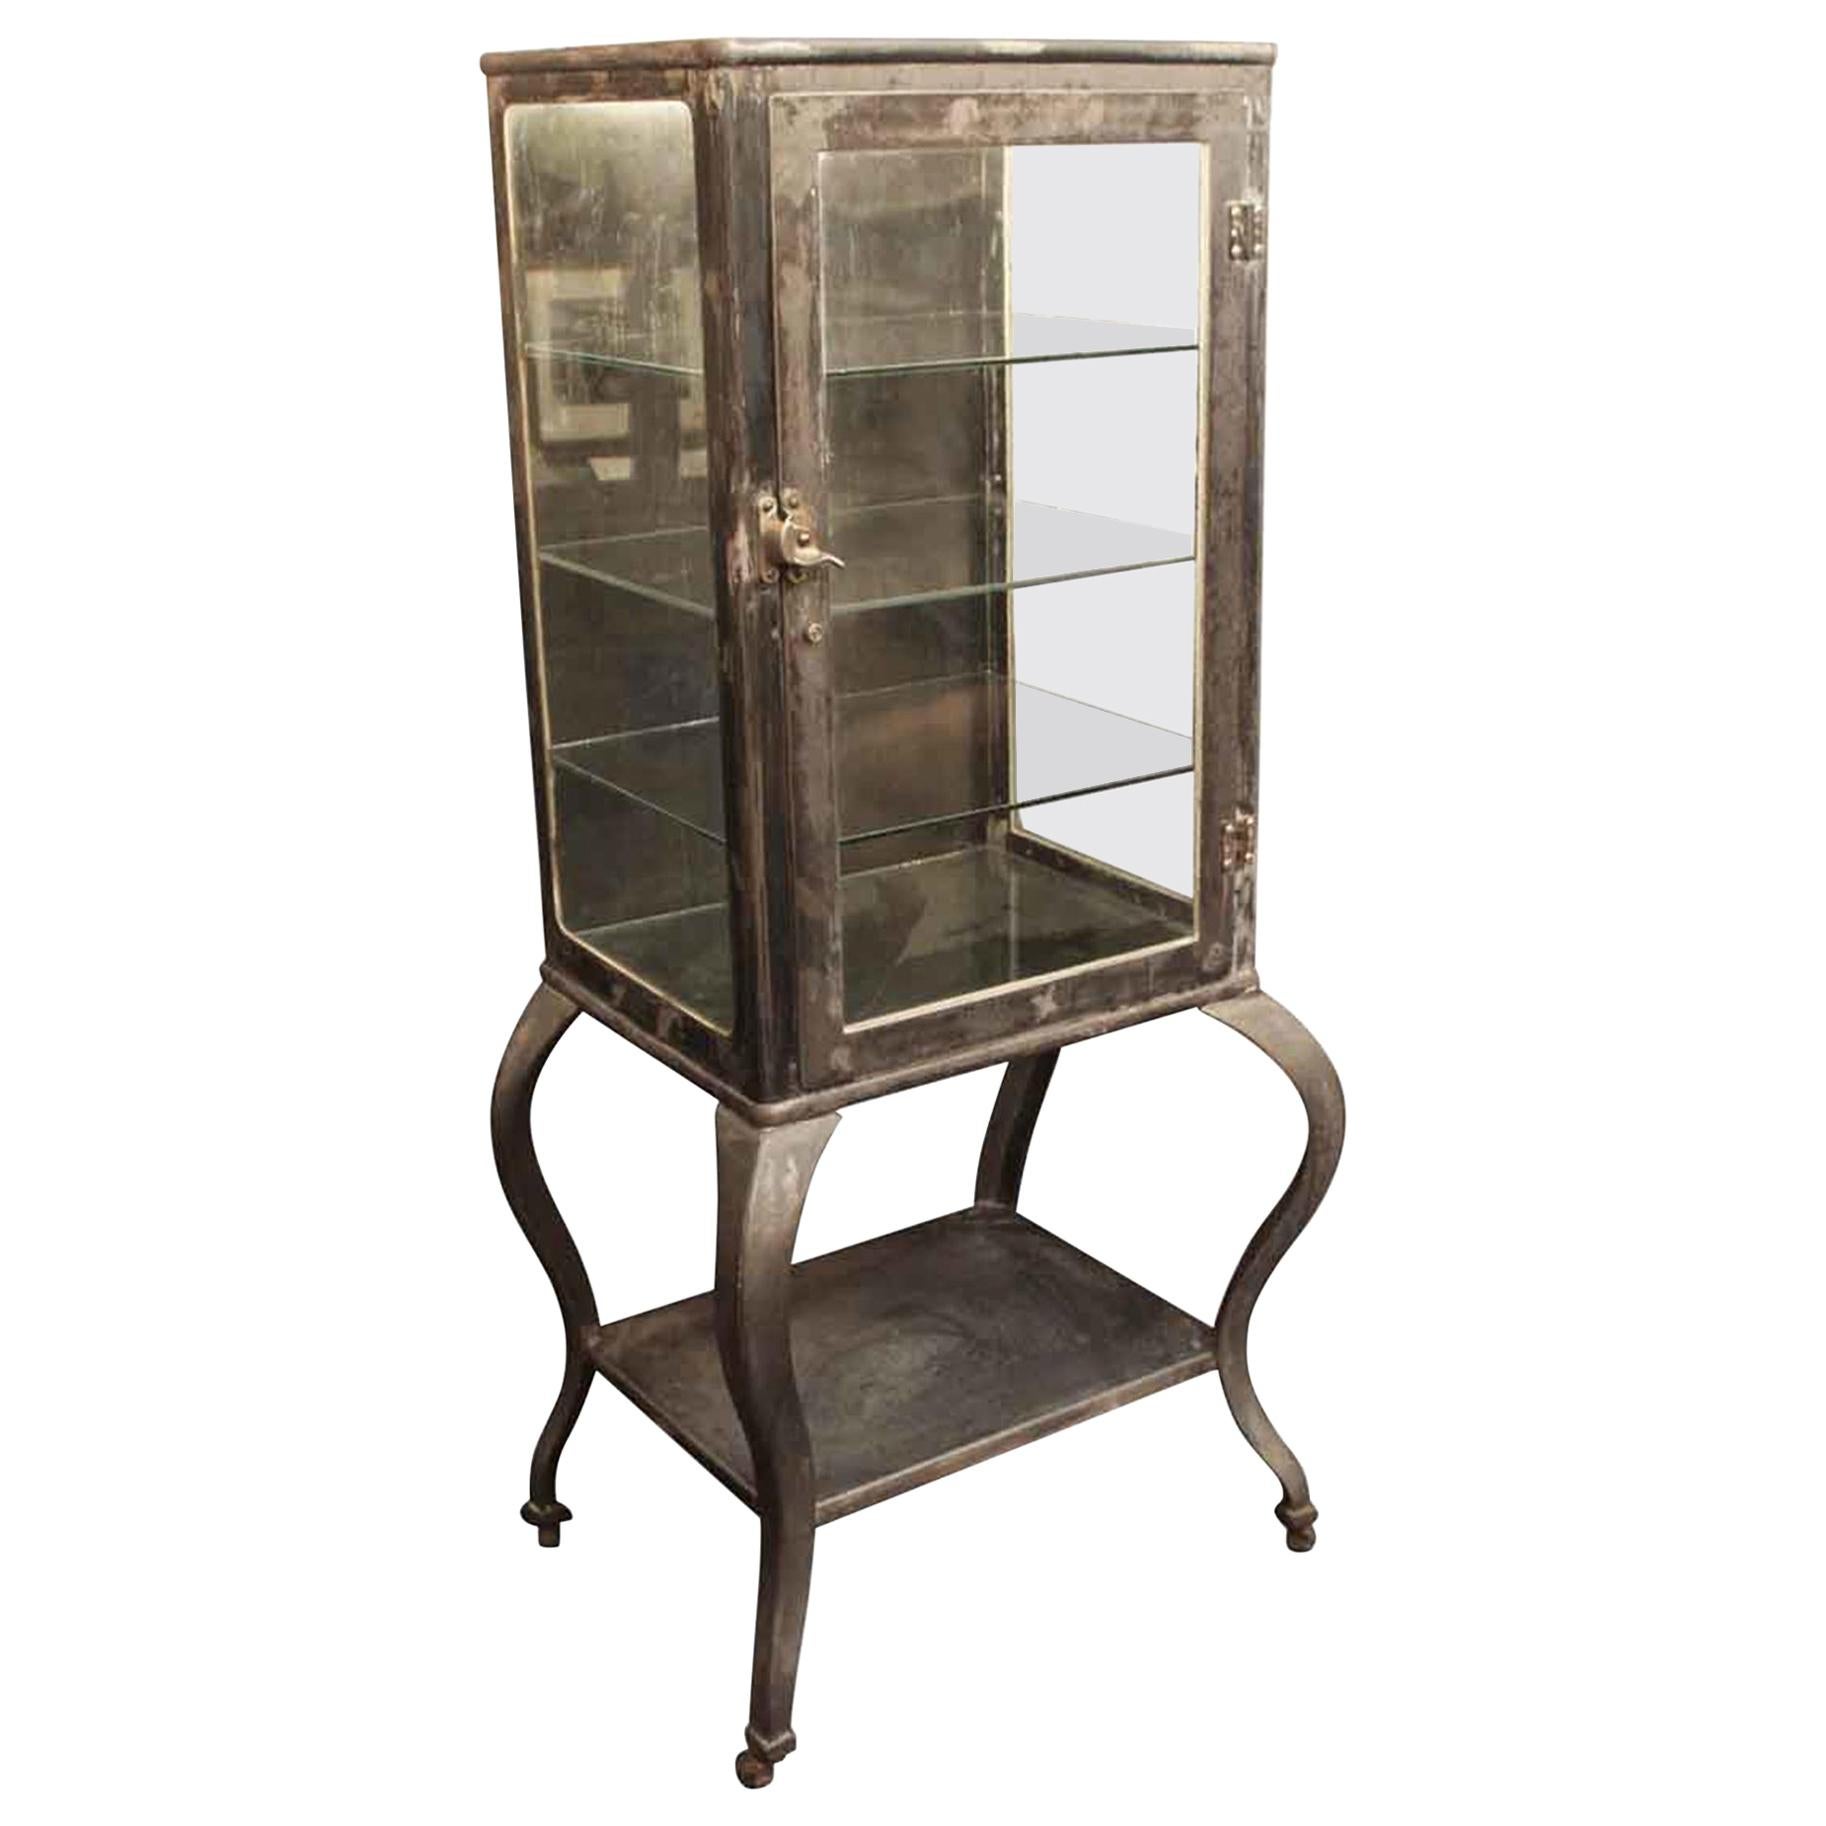 1930s Stripped and Lacquered Steel Medical Cabinet with Cabriole Legs